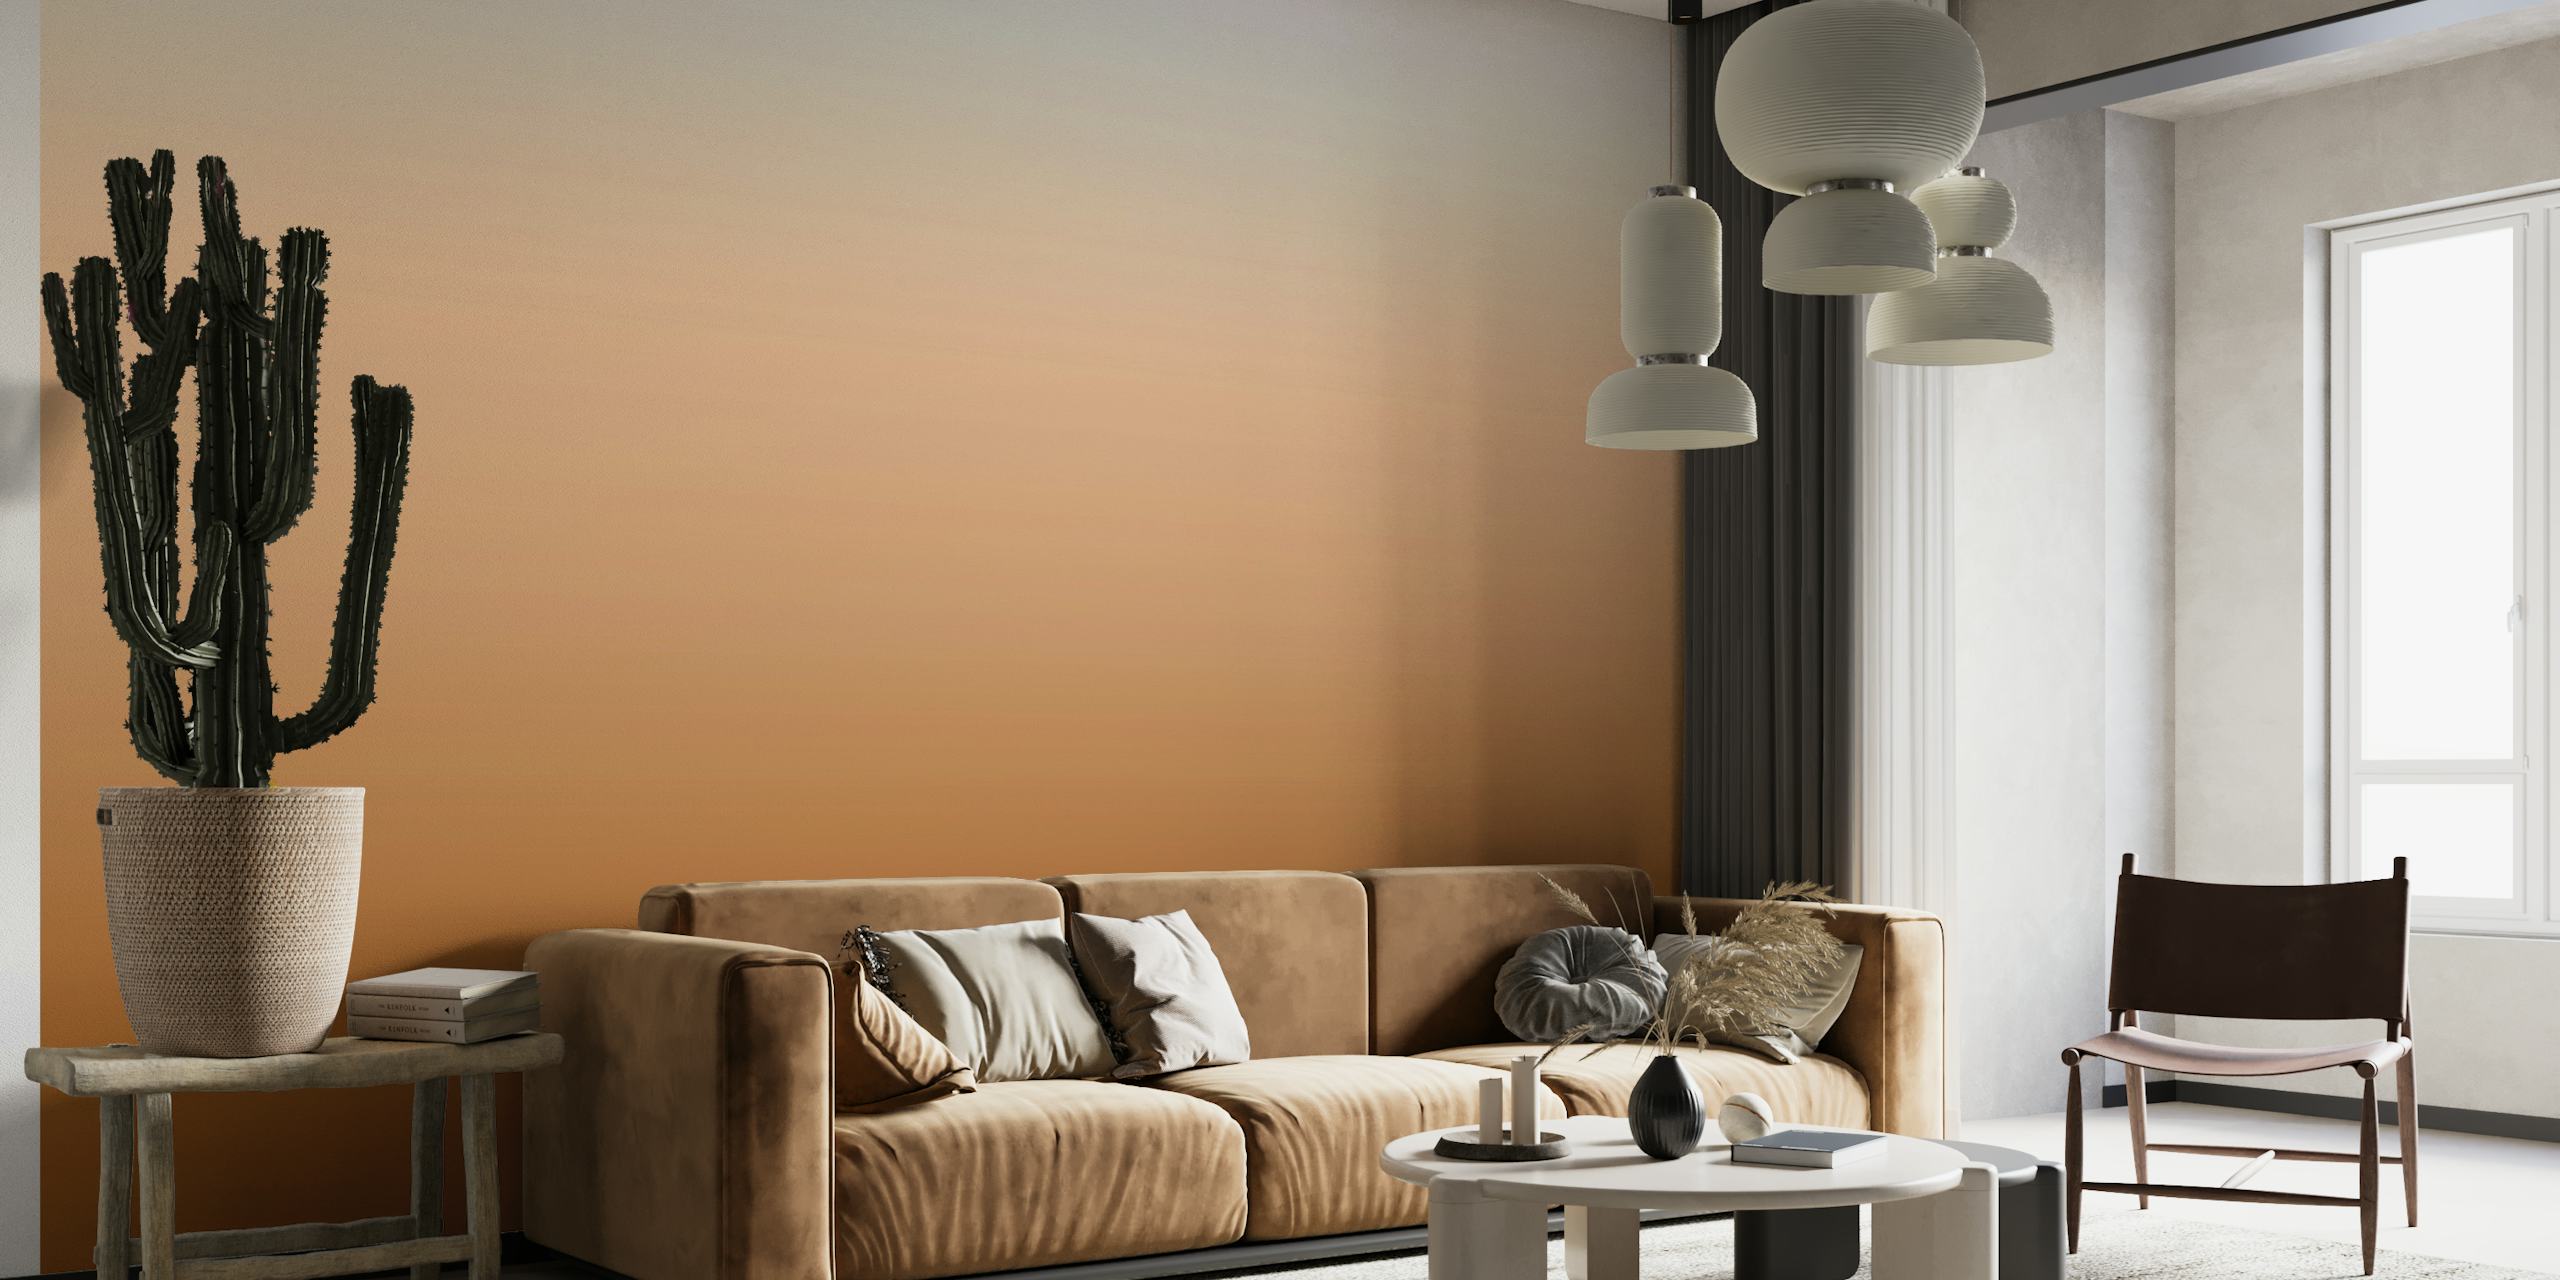 Saddle Brown Gradient wall mural with rich to light hue transition